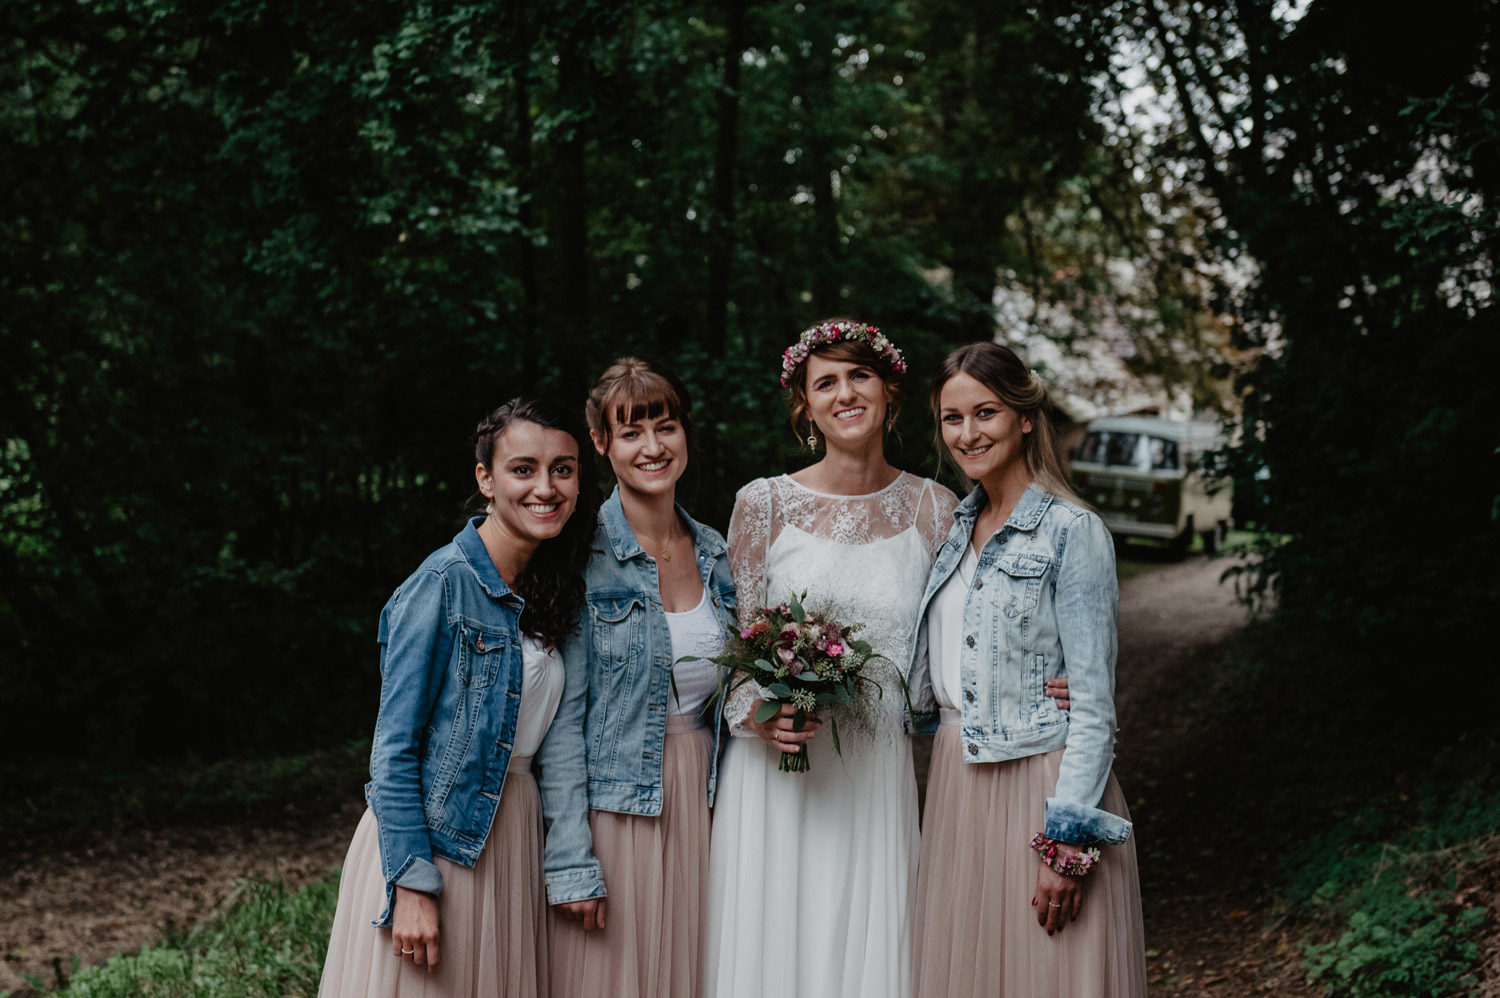 boho bride with flowercrown and bridesmaids in denim jackets pastel tulle skirts with balloons at tipi wedding 